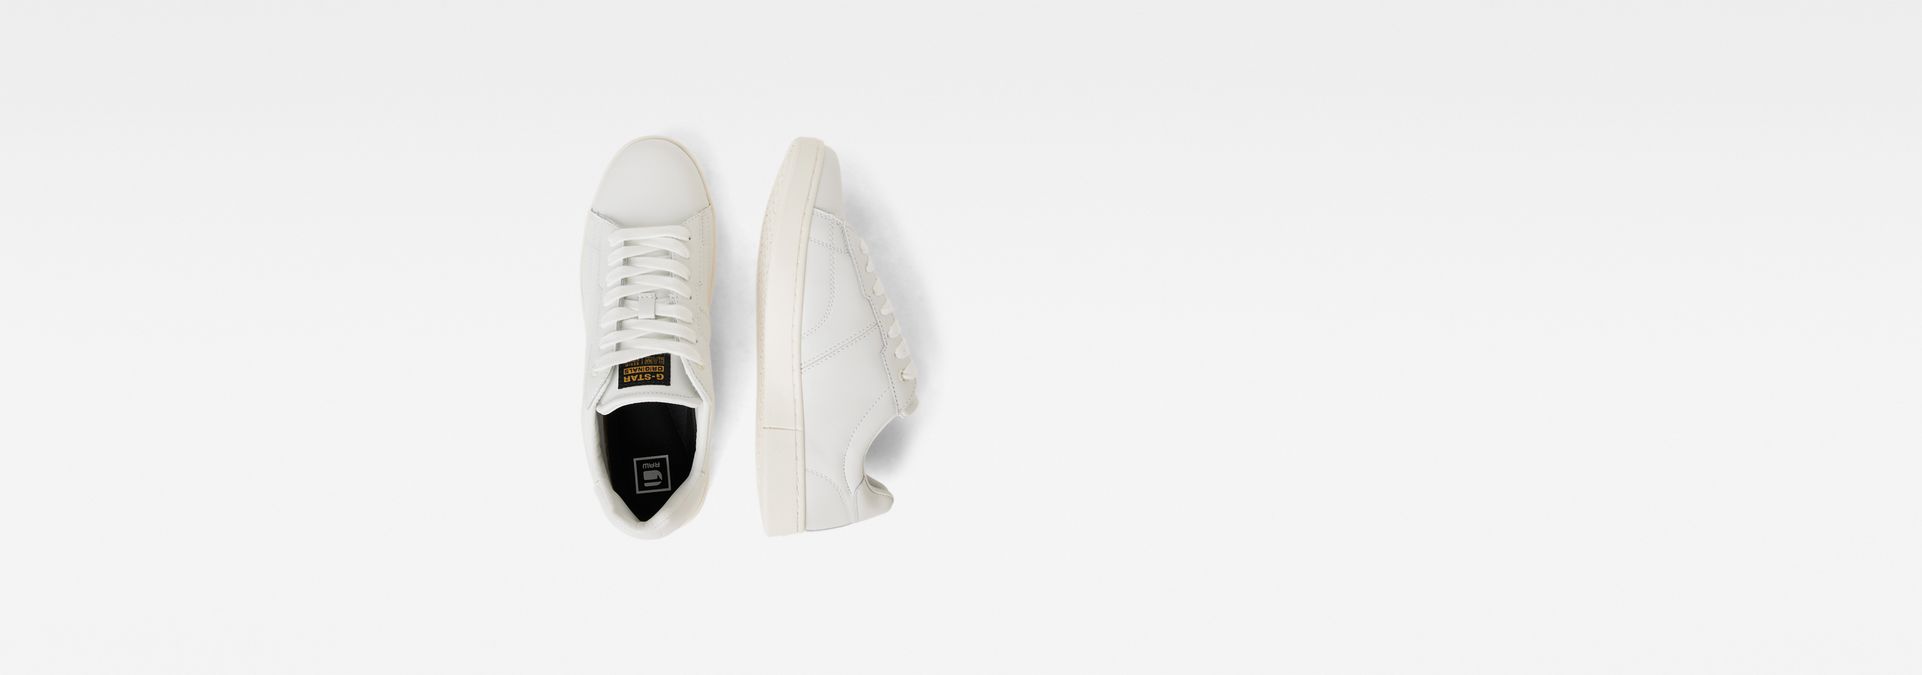 Cadet Leather Sneakers | ホワイト | G-Star RAW®